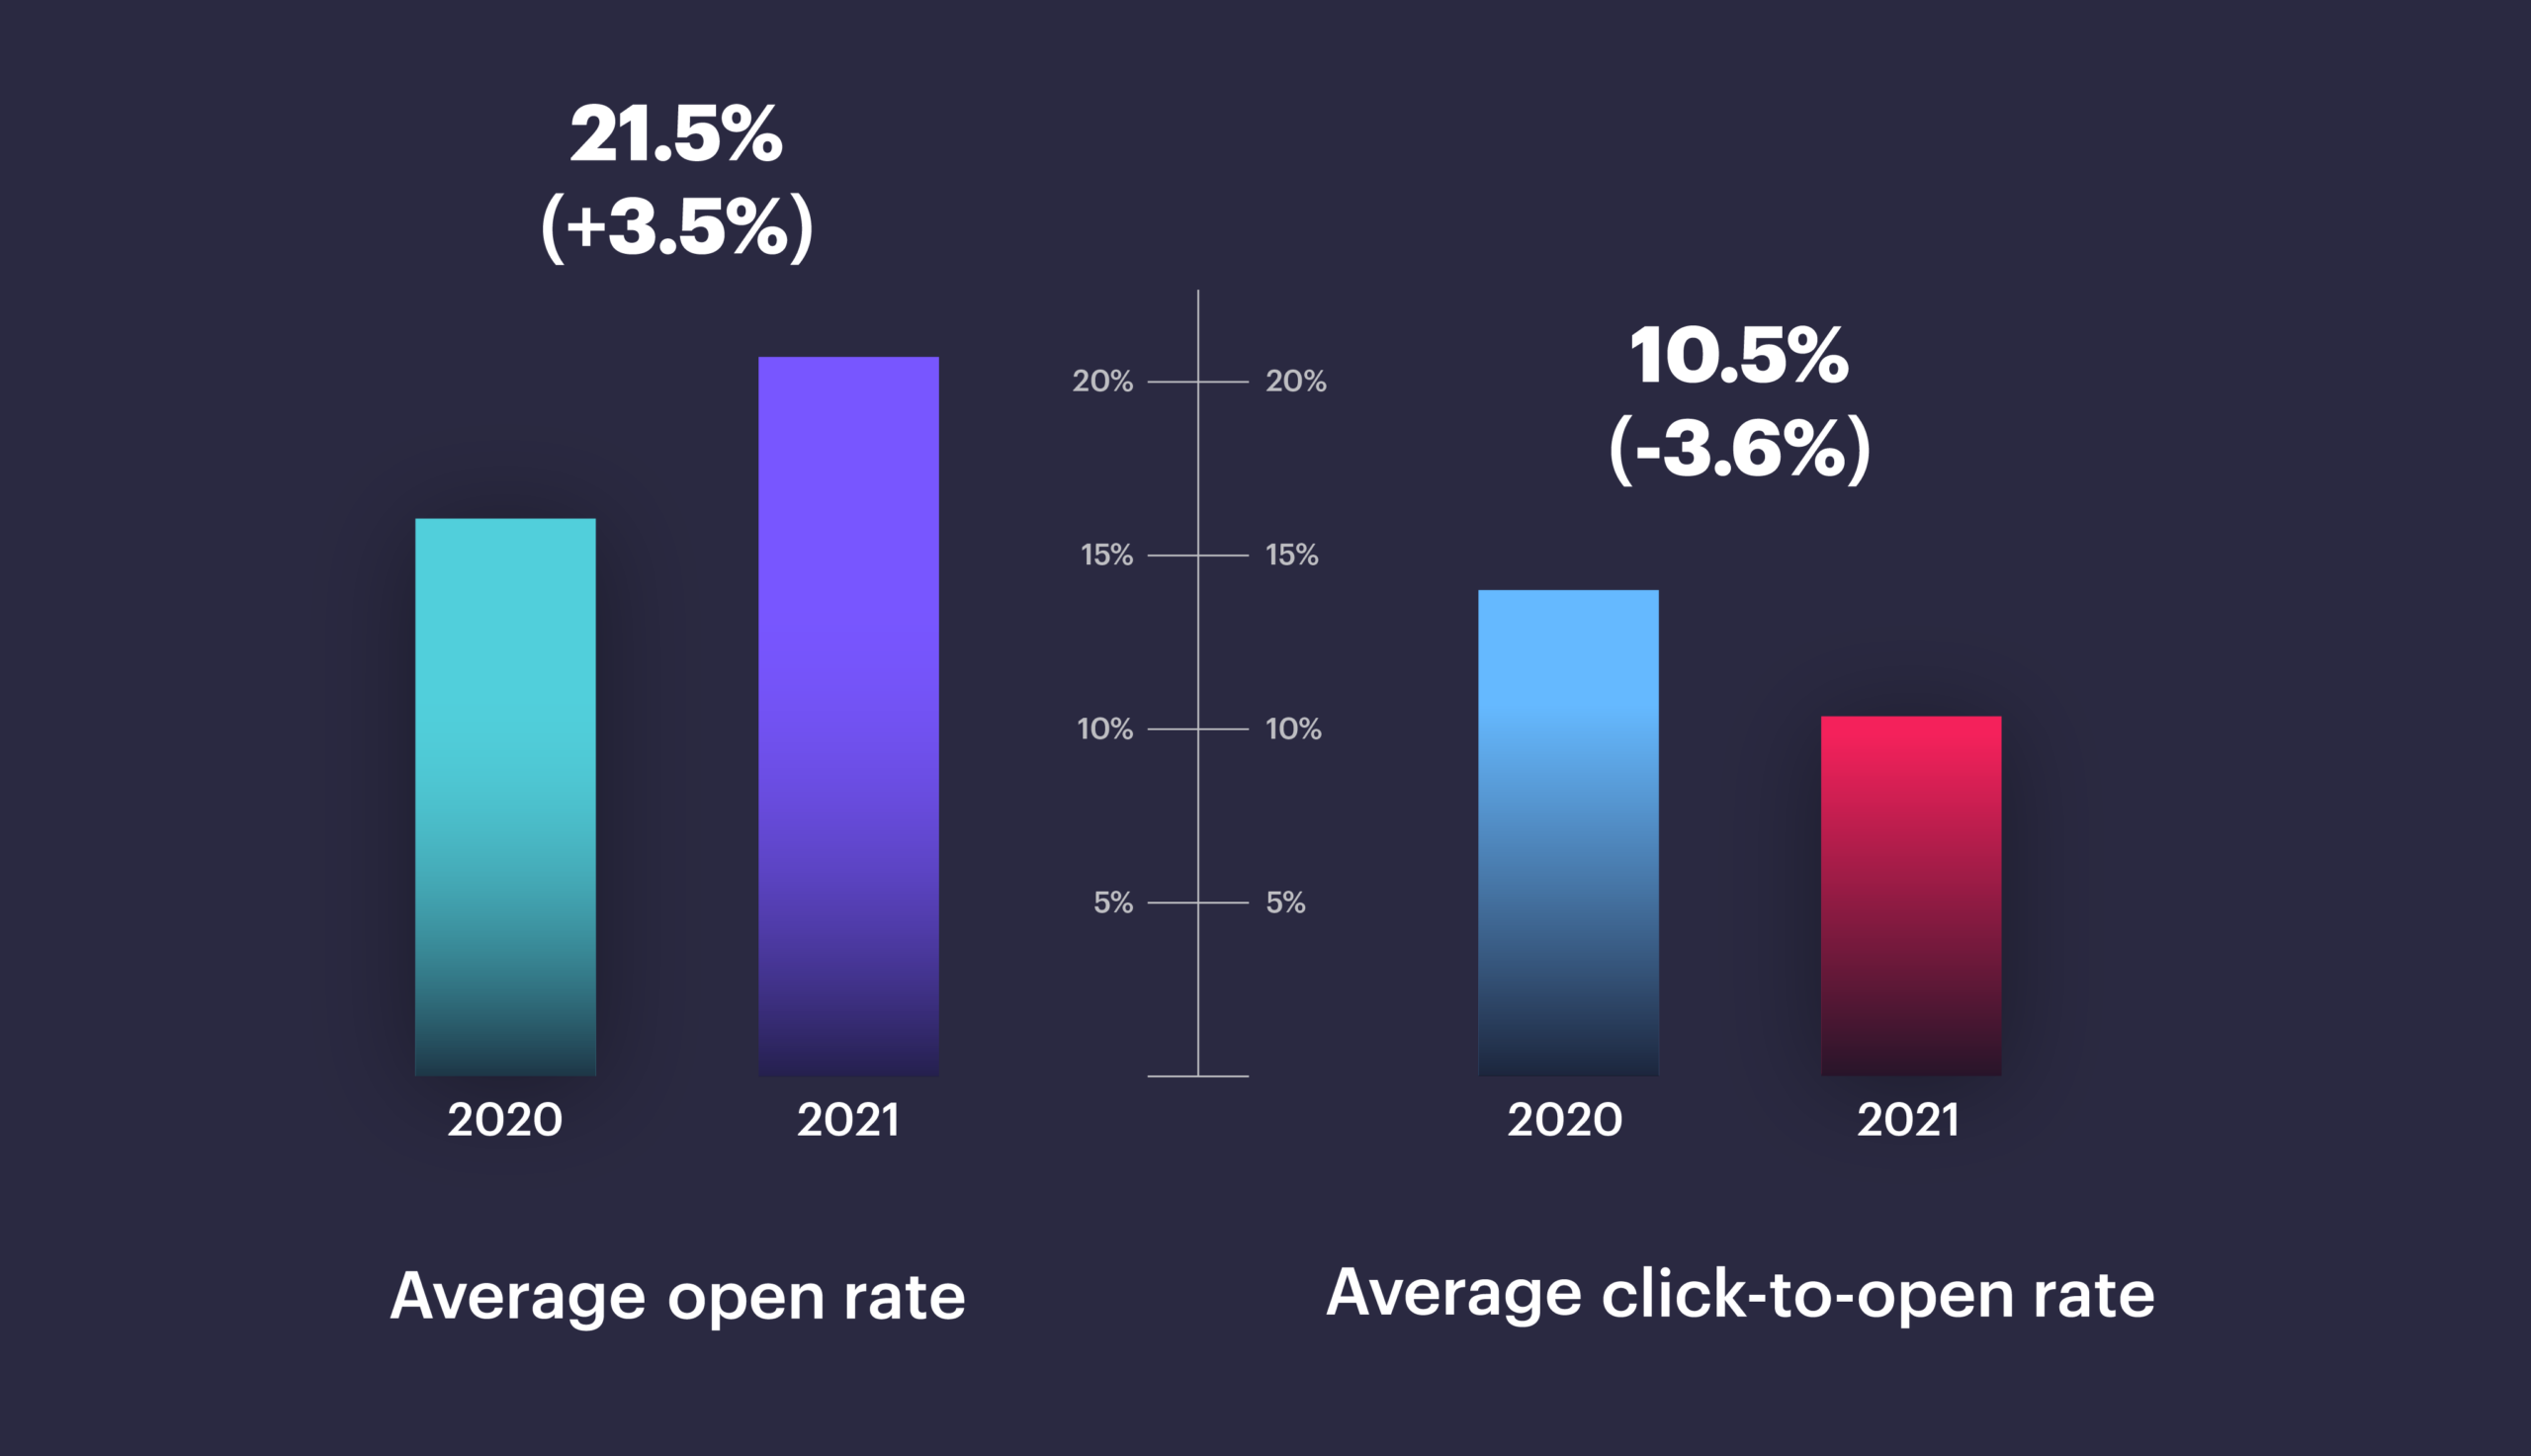 Average open rates and click-to-open rates in 2021, compared to 2020.